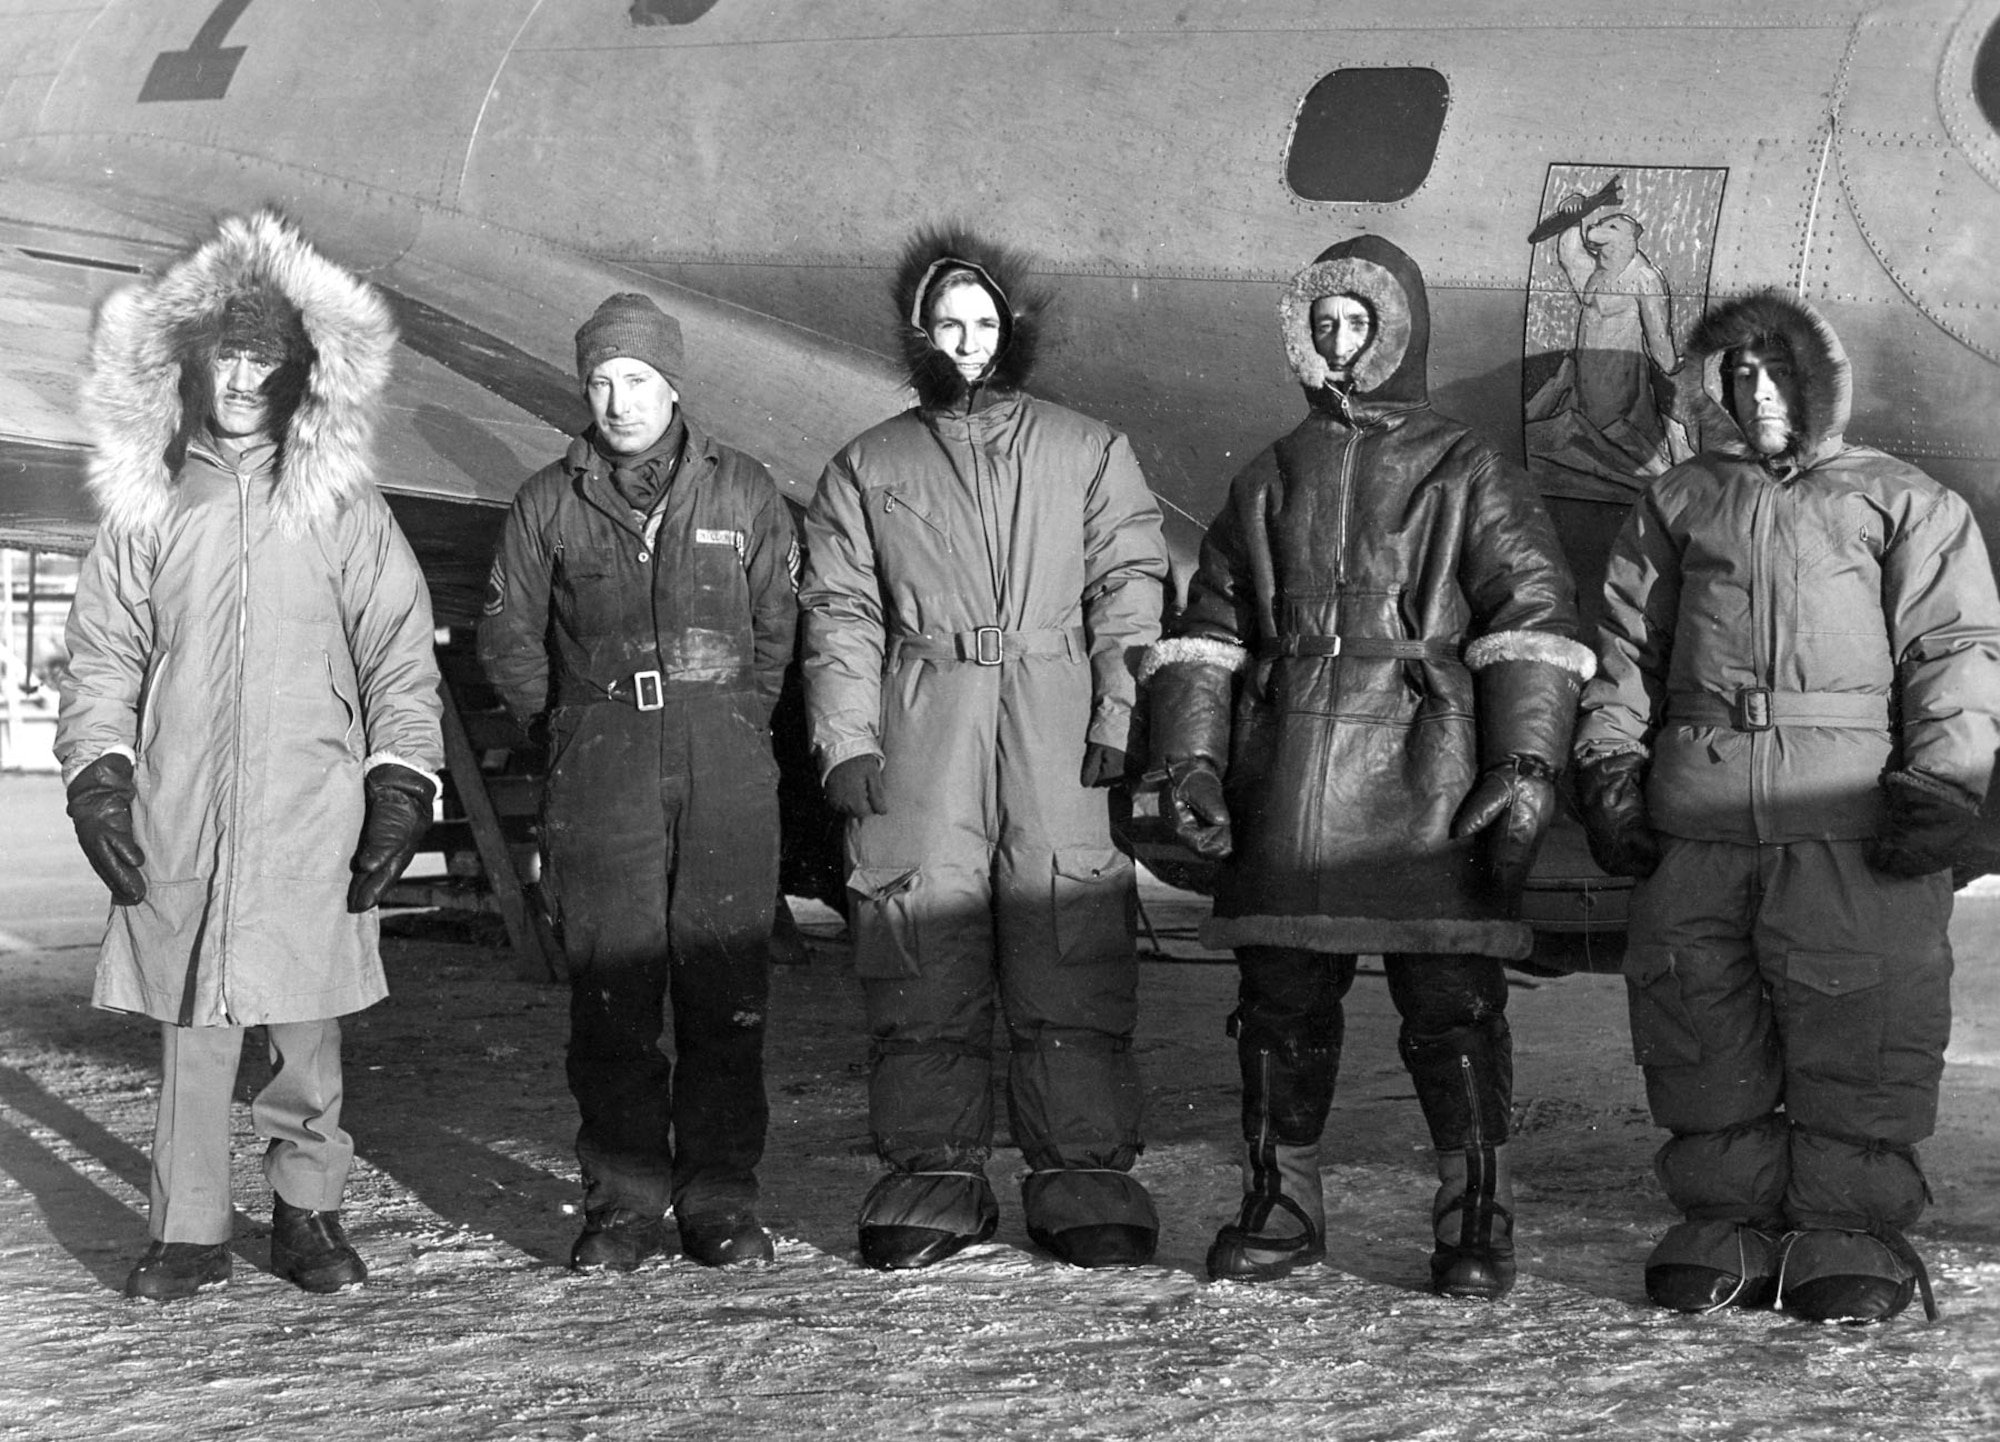 Cold weather gear do's and don'ts > 302nd Airlift Wing > Article